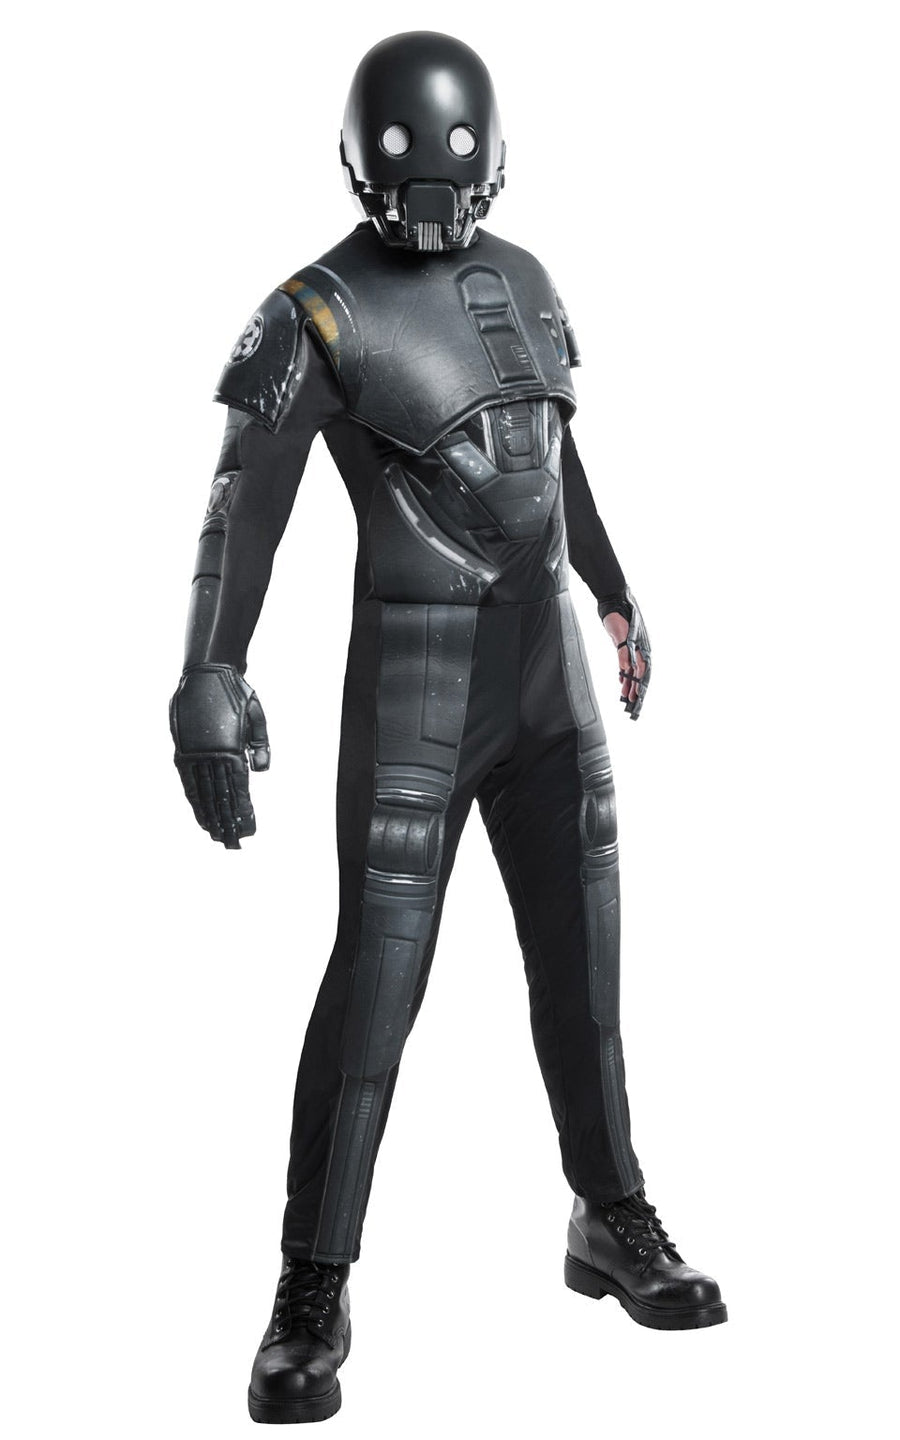 K2S0 Costume Deluxe Adult Rogue One Star Wars_1